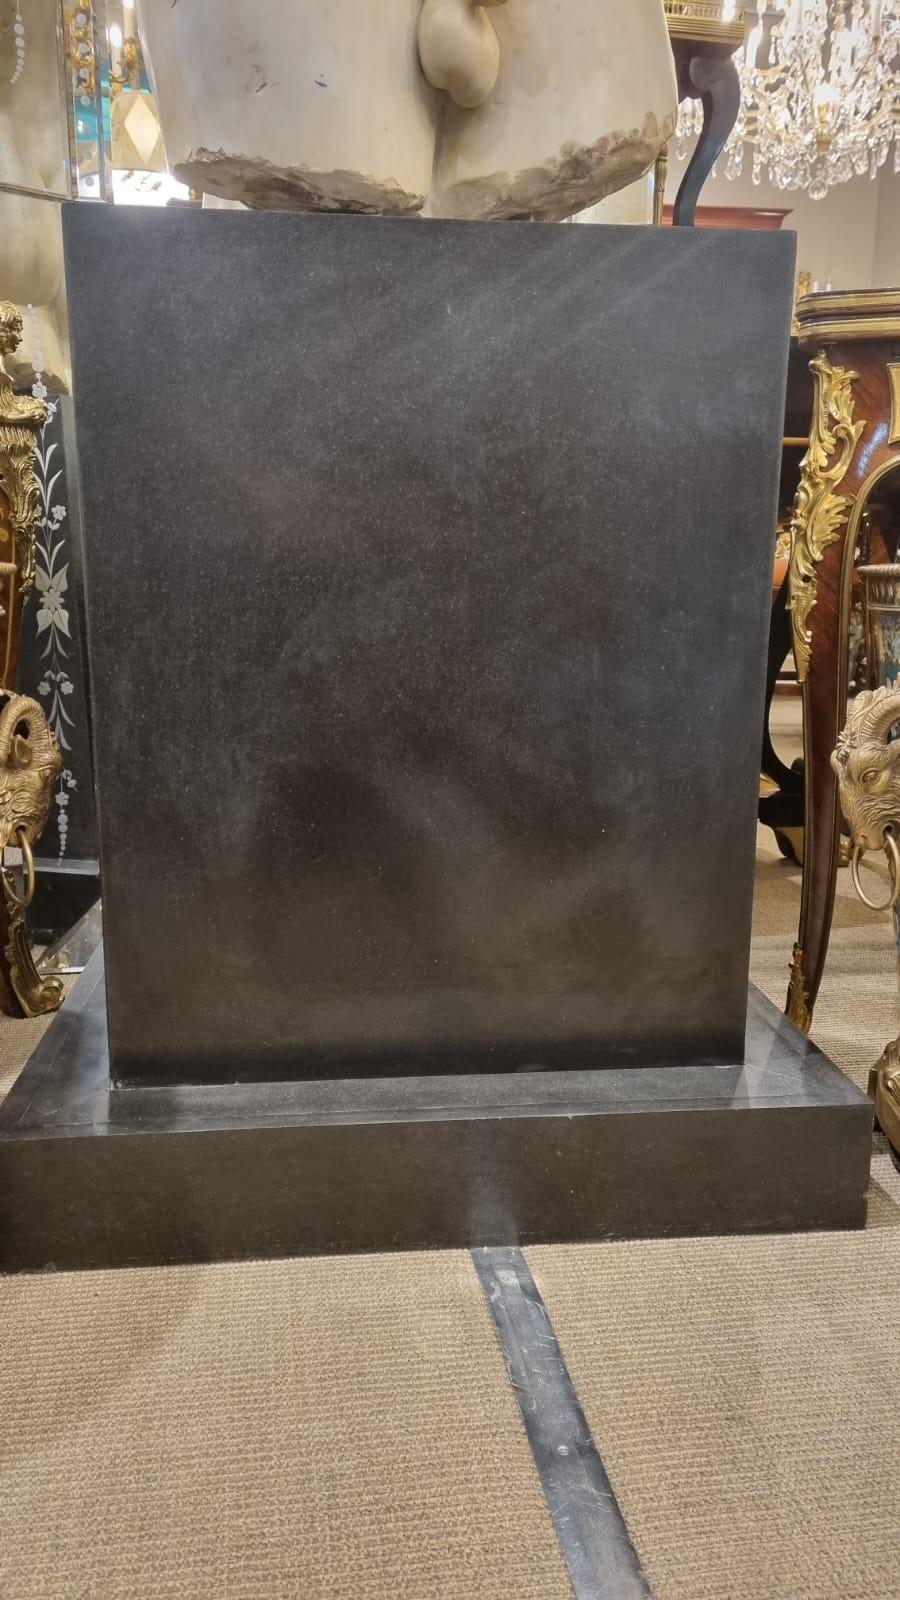 Amazing Italian marble torso standing on a black marble base
Classic Grand Tour look and the size of this piece - 173 cm high (68 inches) is big
The torso itself is a lesson in classical carving, look at how the musceltone has been skillfully